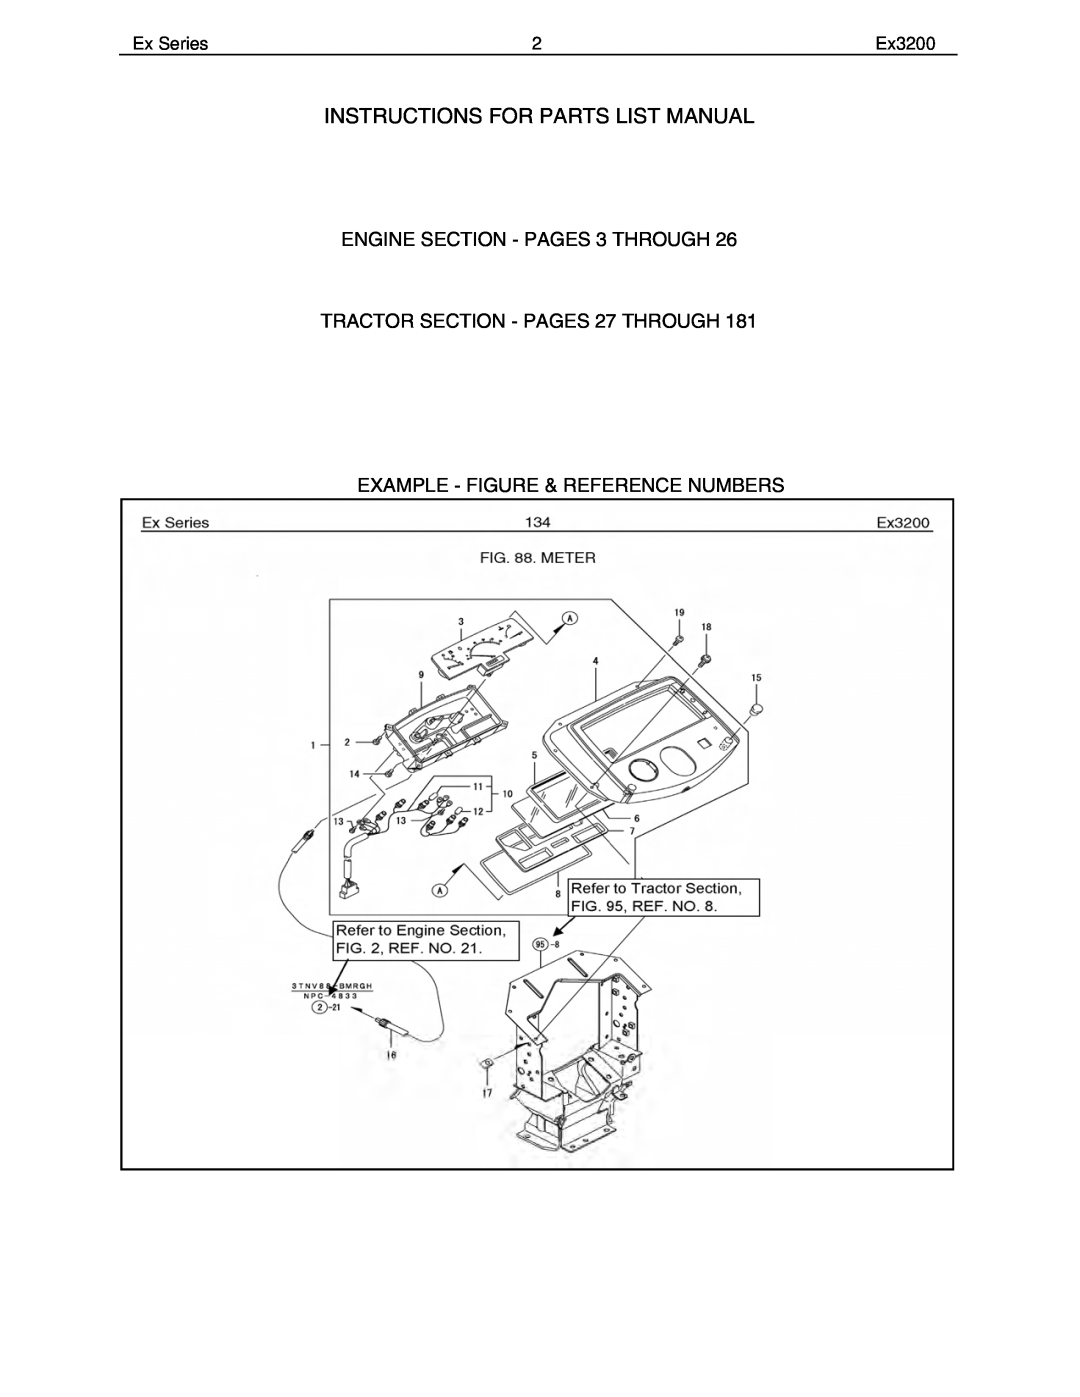 Cub Cadet Ex32002 Instructions For Parts List Manual, ENGINE SECTION - PAGES 3 THROUGH, TRACTOR SECTION - PAGES 27 THROUGH 